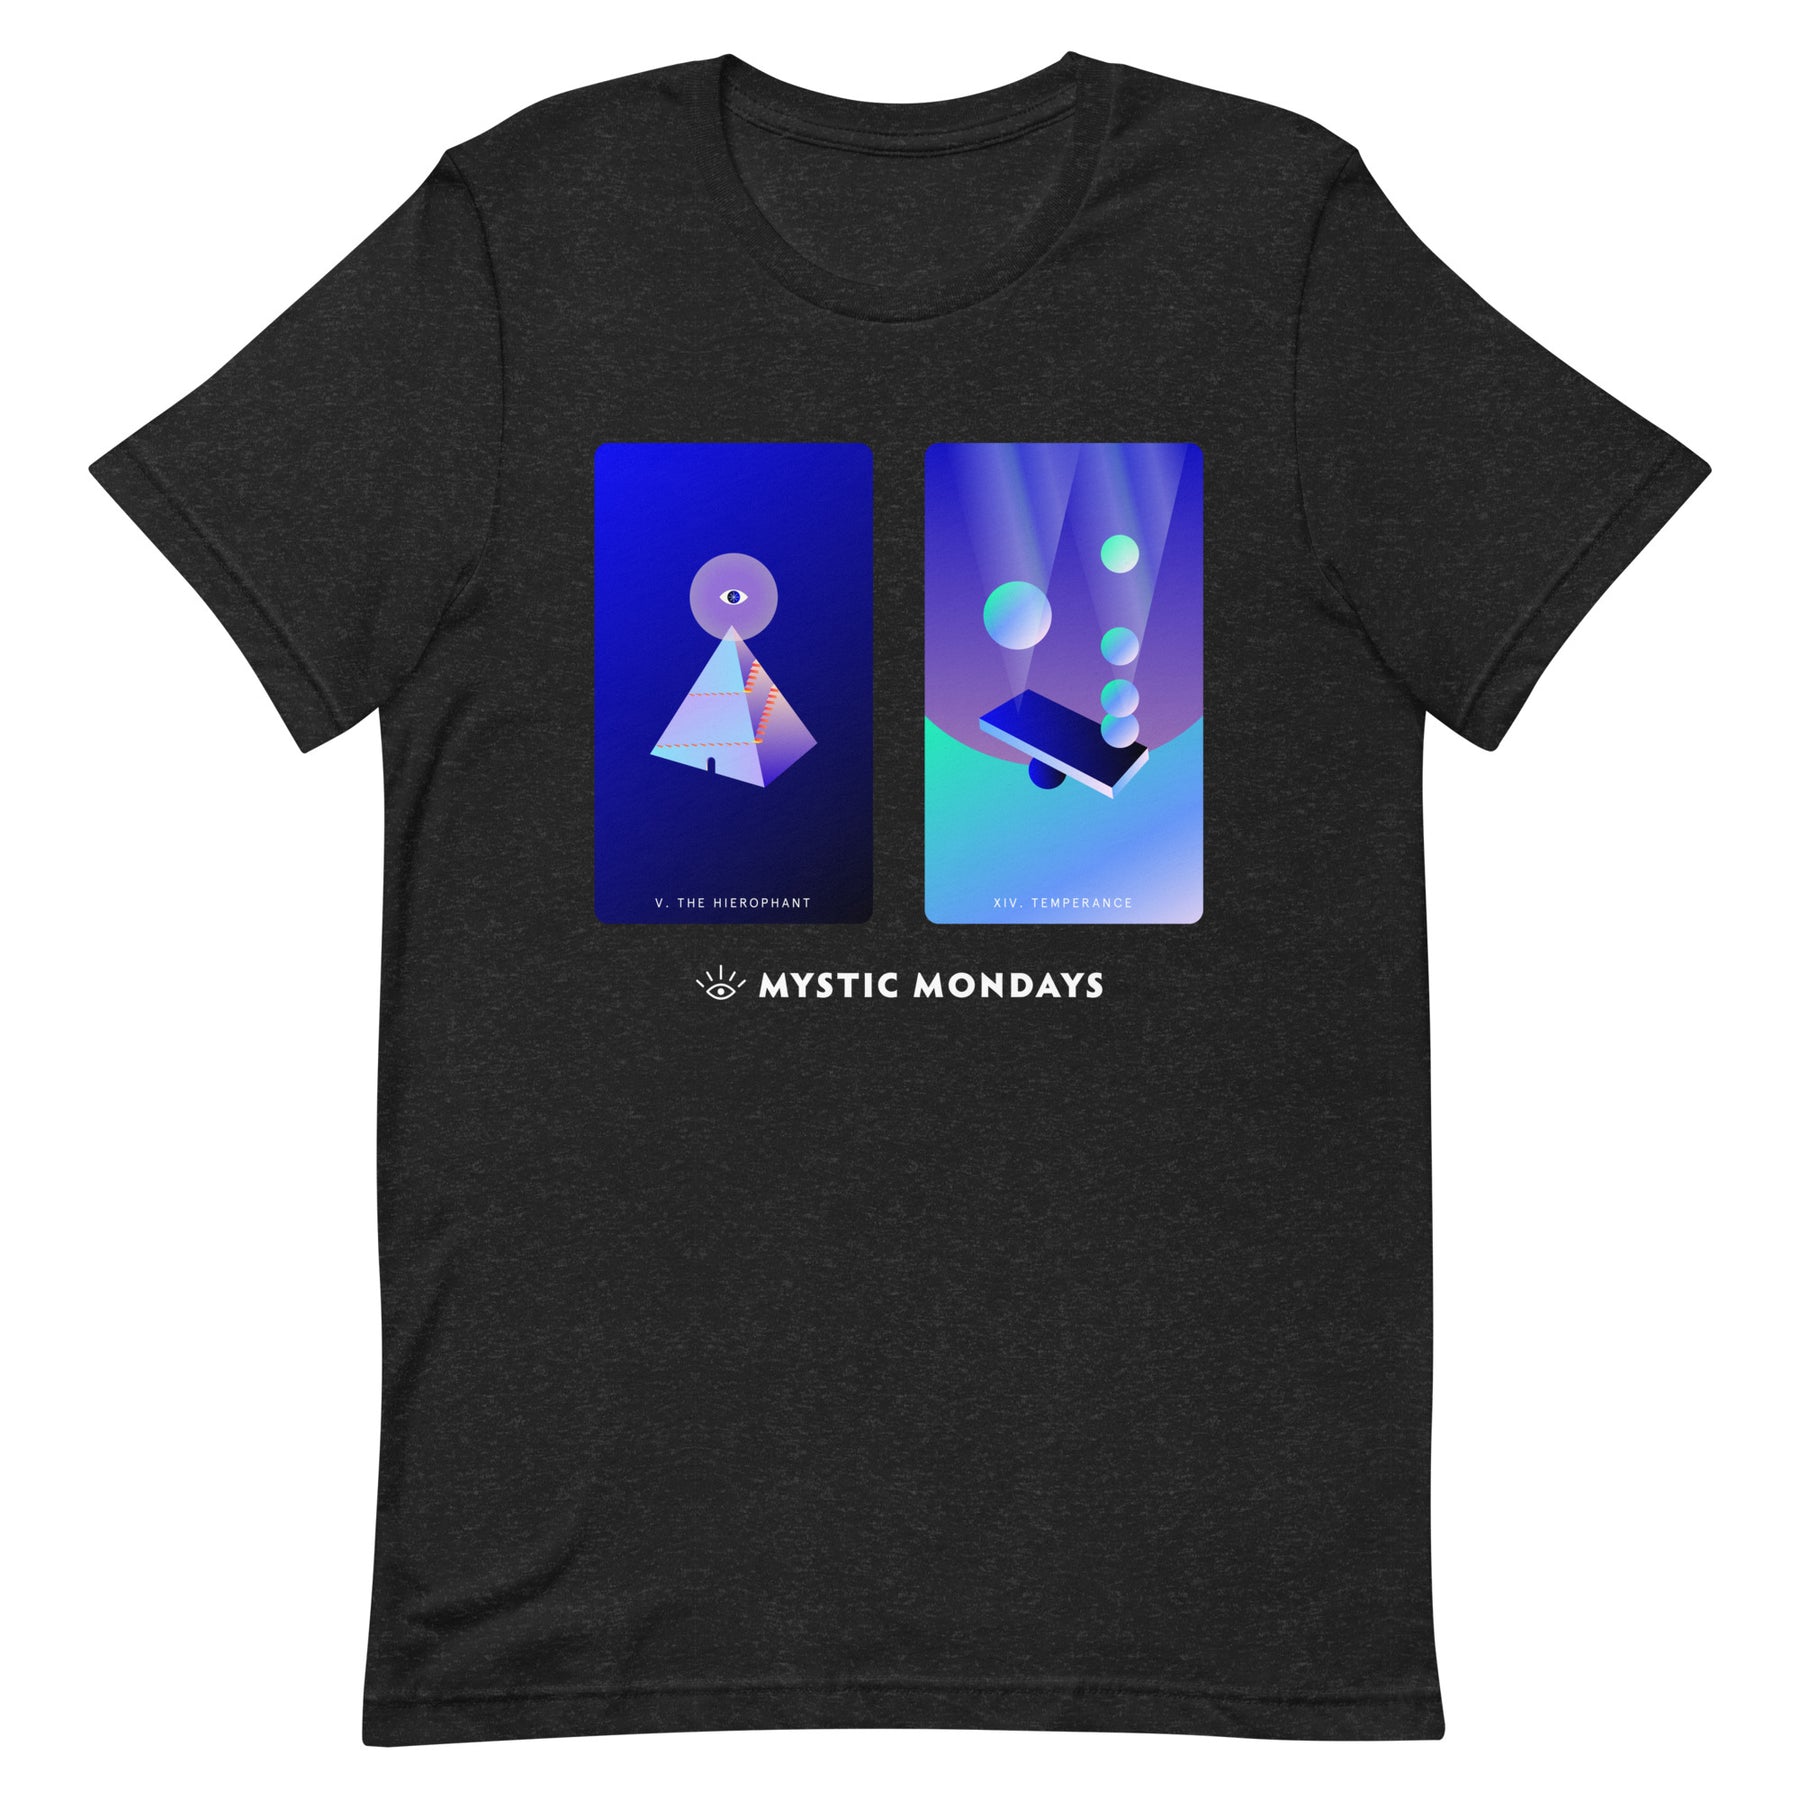 The Hierophant and Temperance T-shirt